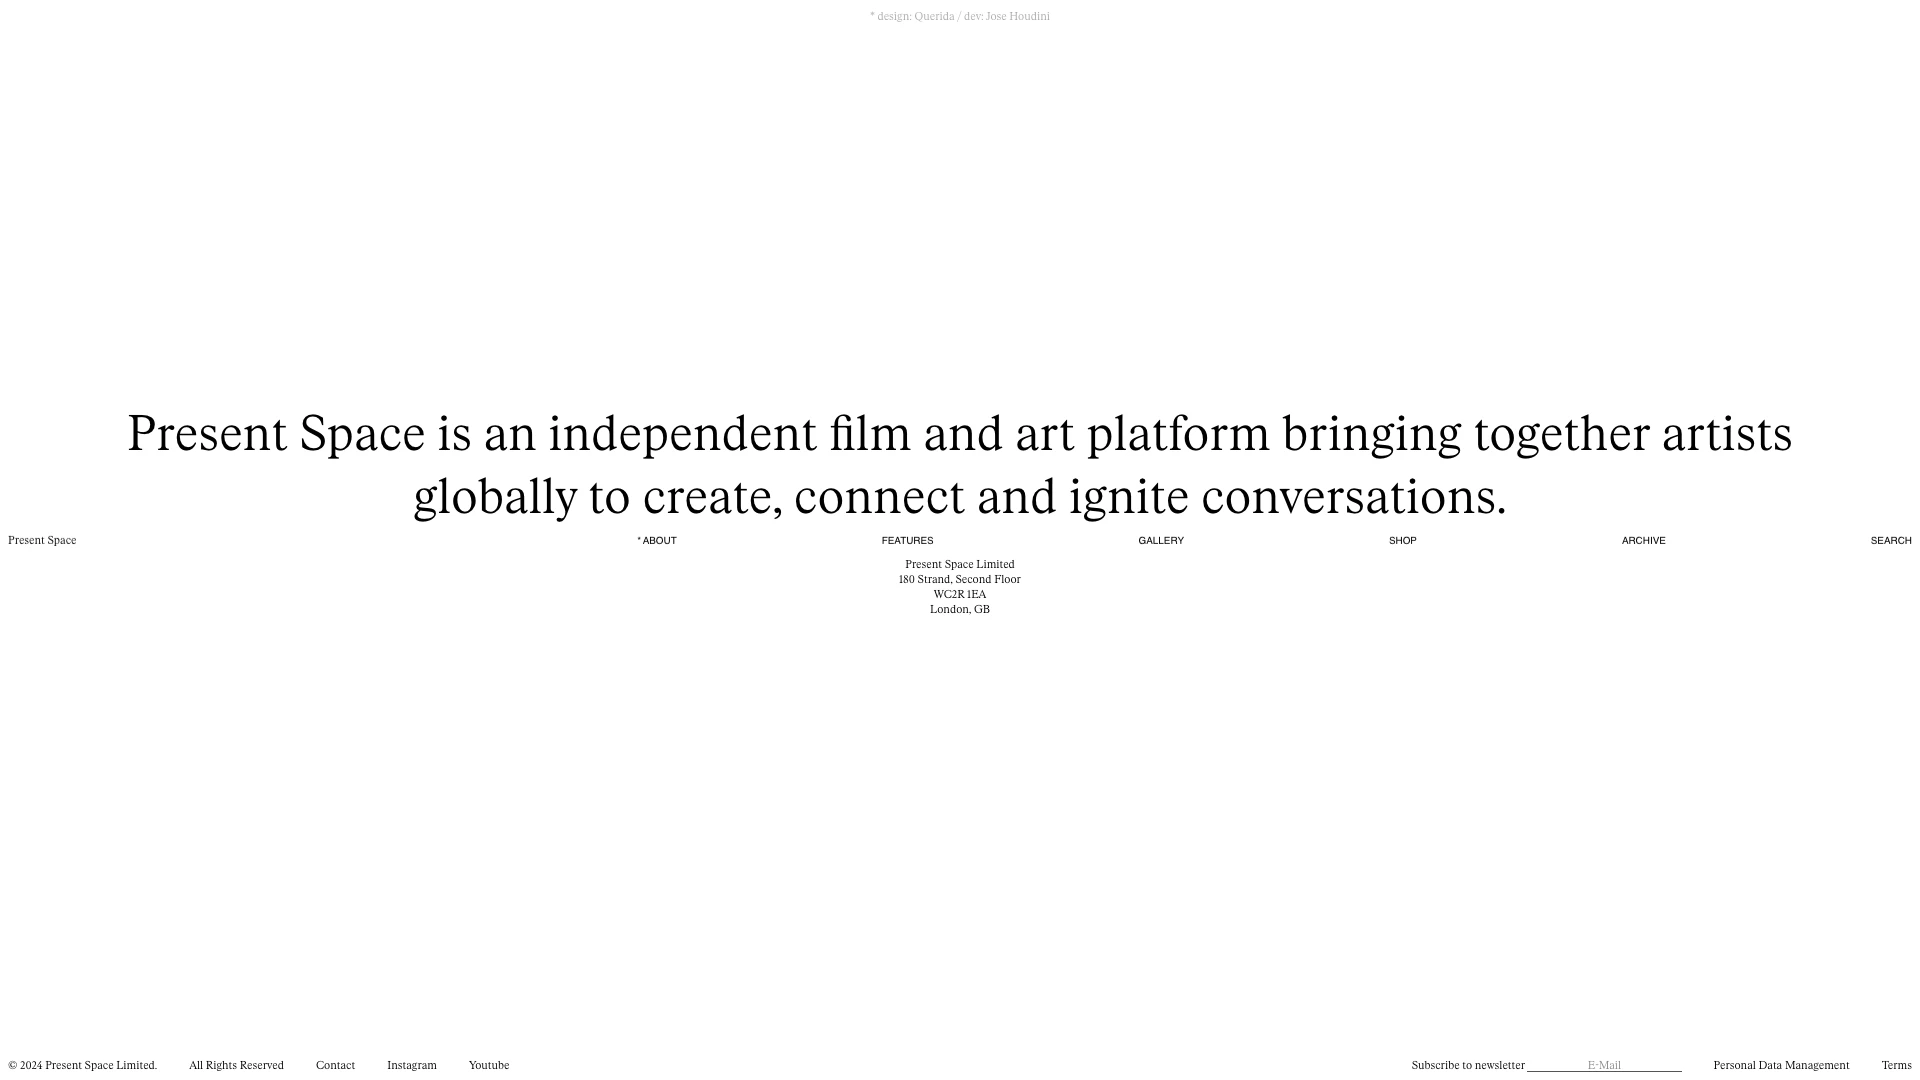 Present Space Landing Page Example: Present Space is an independent film and art platform bringing together artists globally to create, connect and ignite conversations.